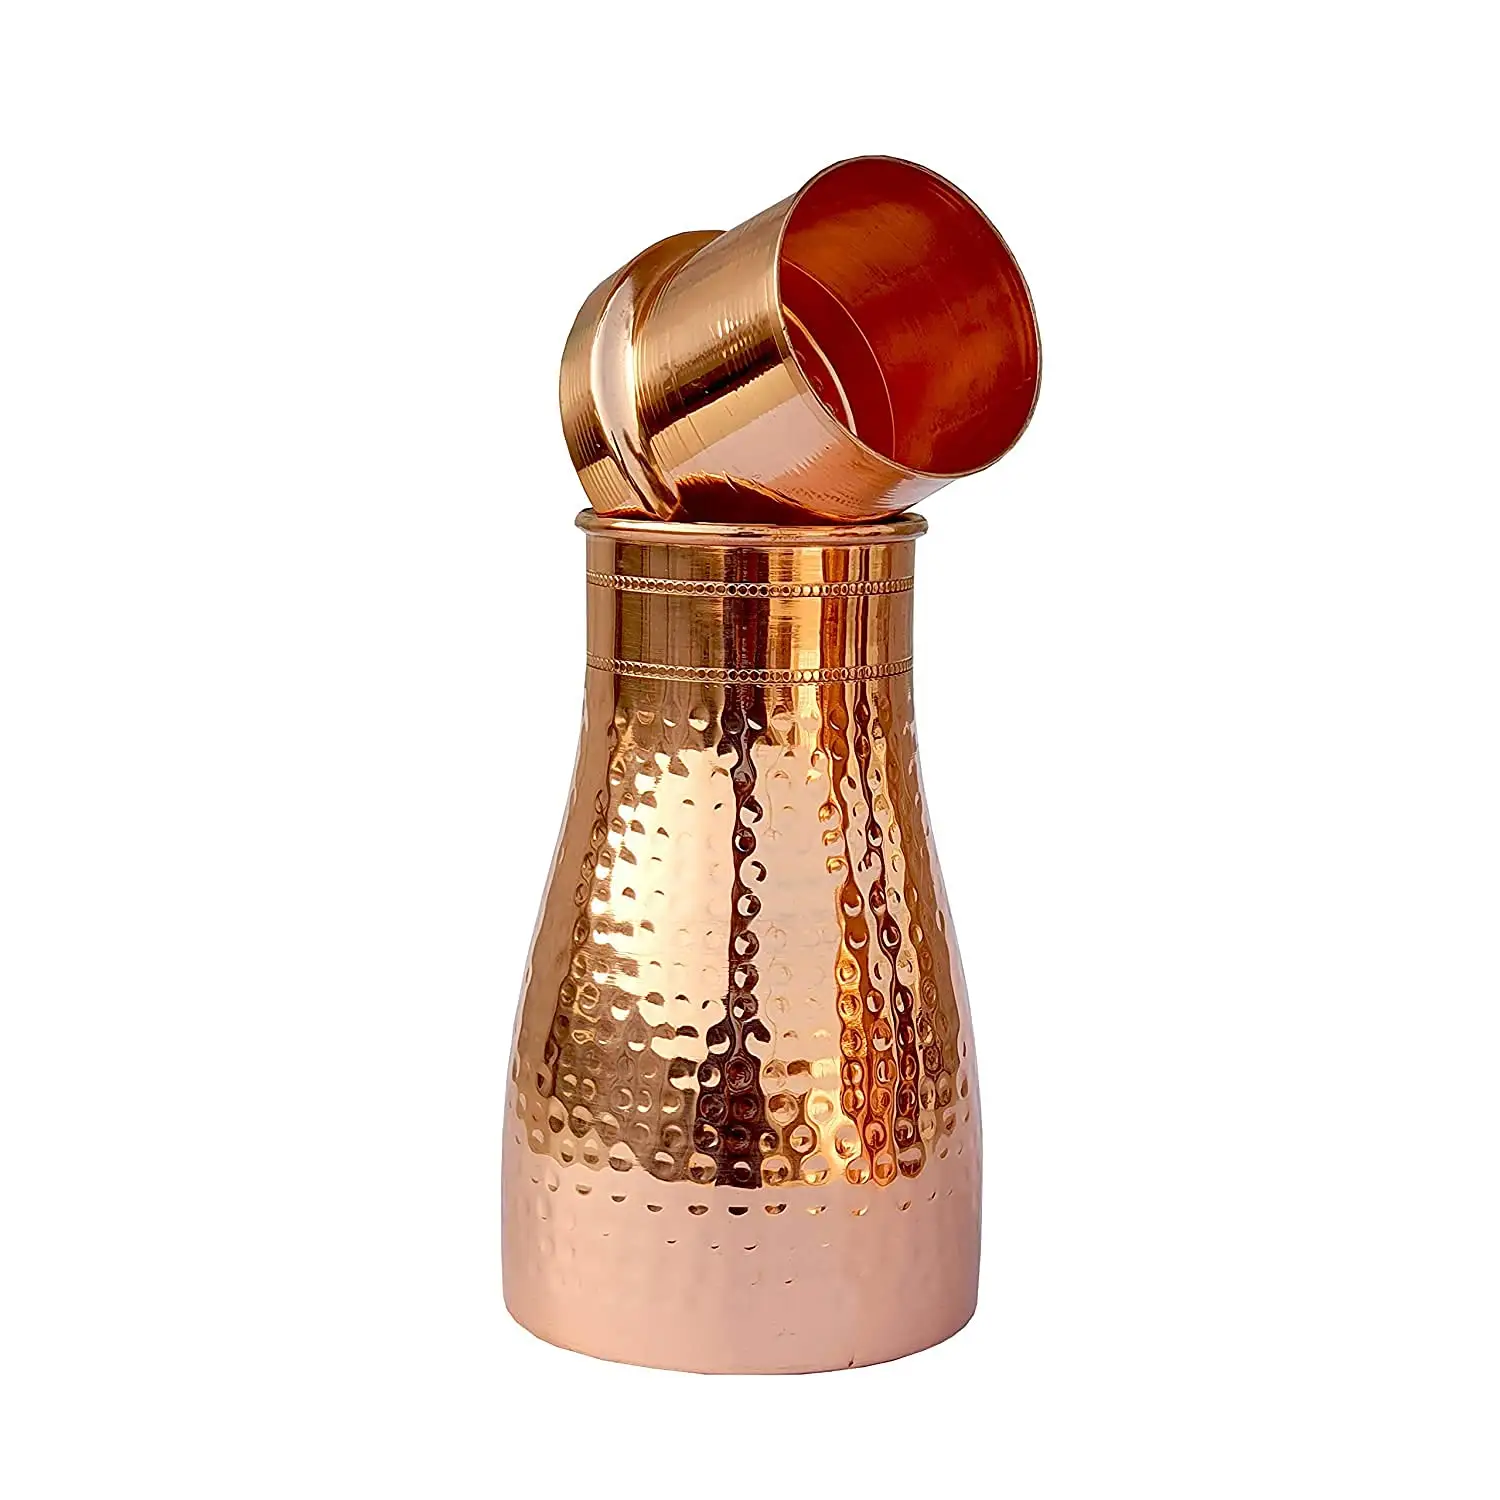 Amazing Pure Copper Material Water Bottle Inbuilt Copper Vessel For Drinking Water Copper Water Jug With Glass Bulk Quantity